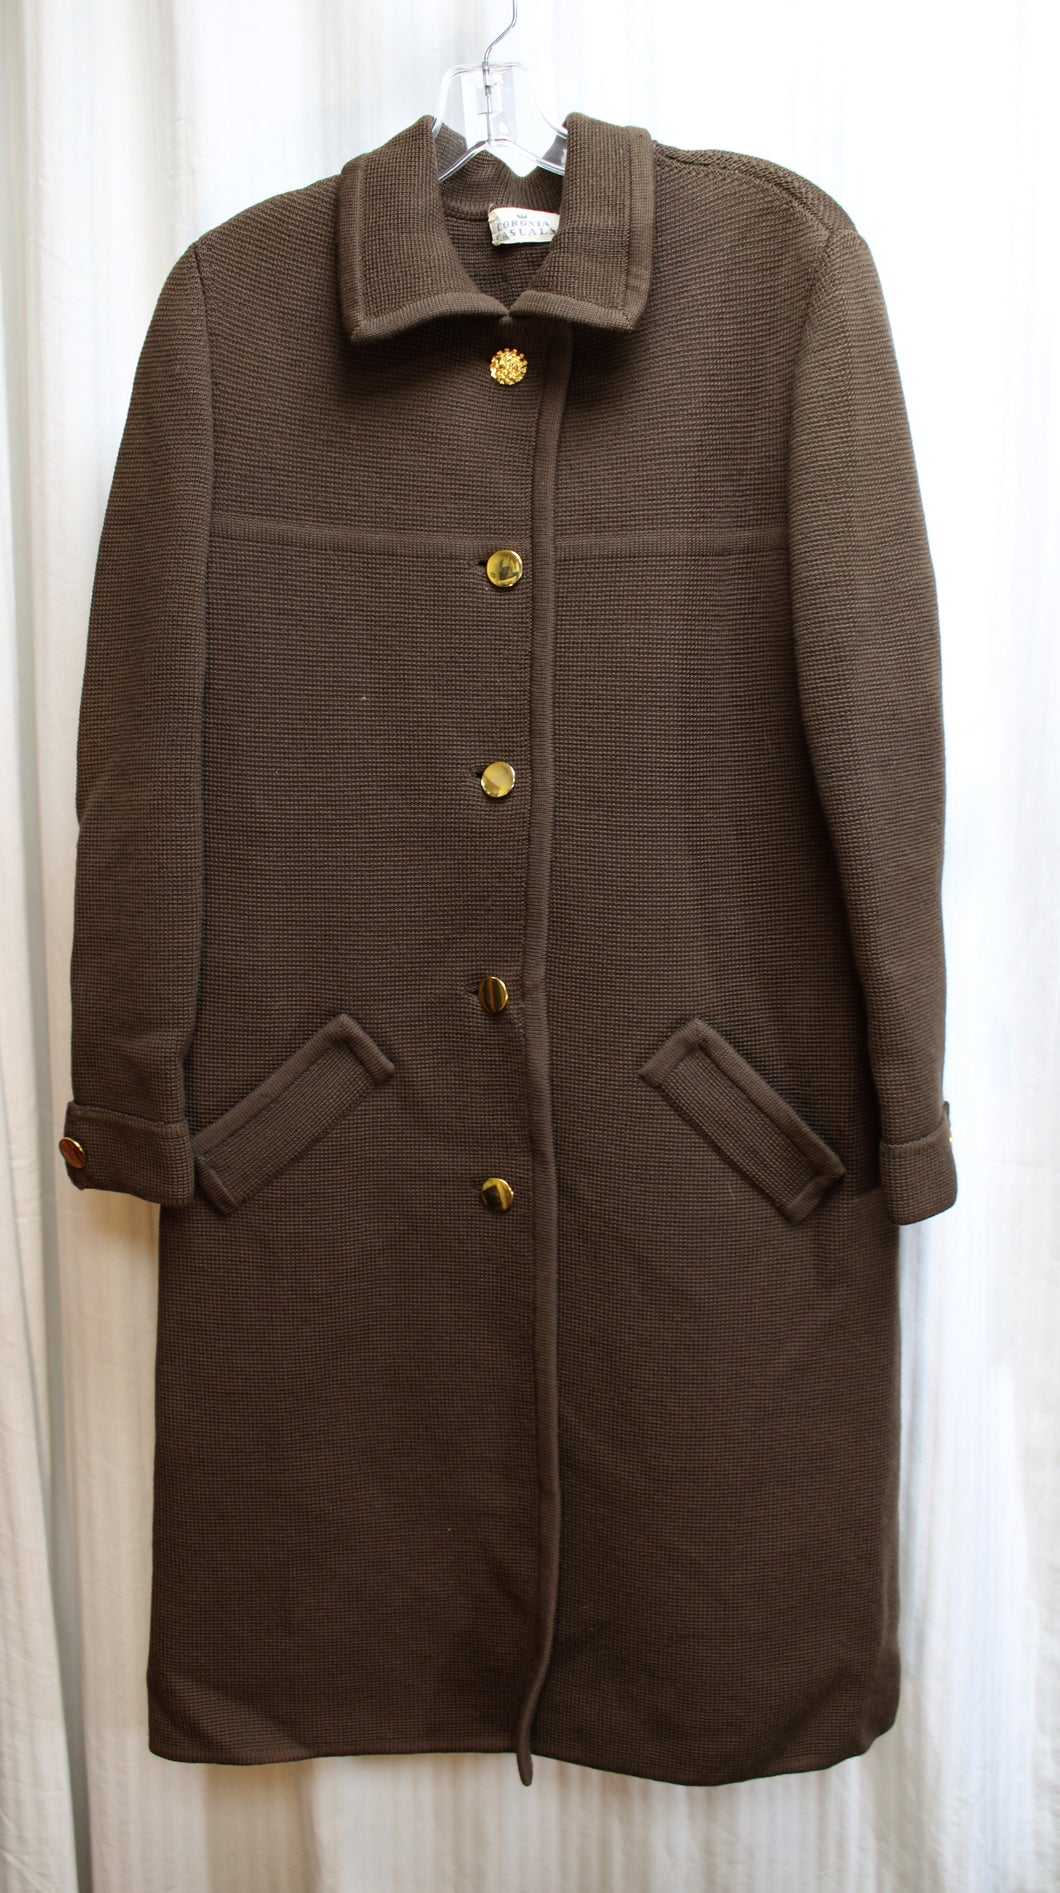 Vintage - Coronia Casuals - Brown Knit Button Front Coat - See Measurements 17